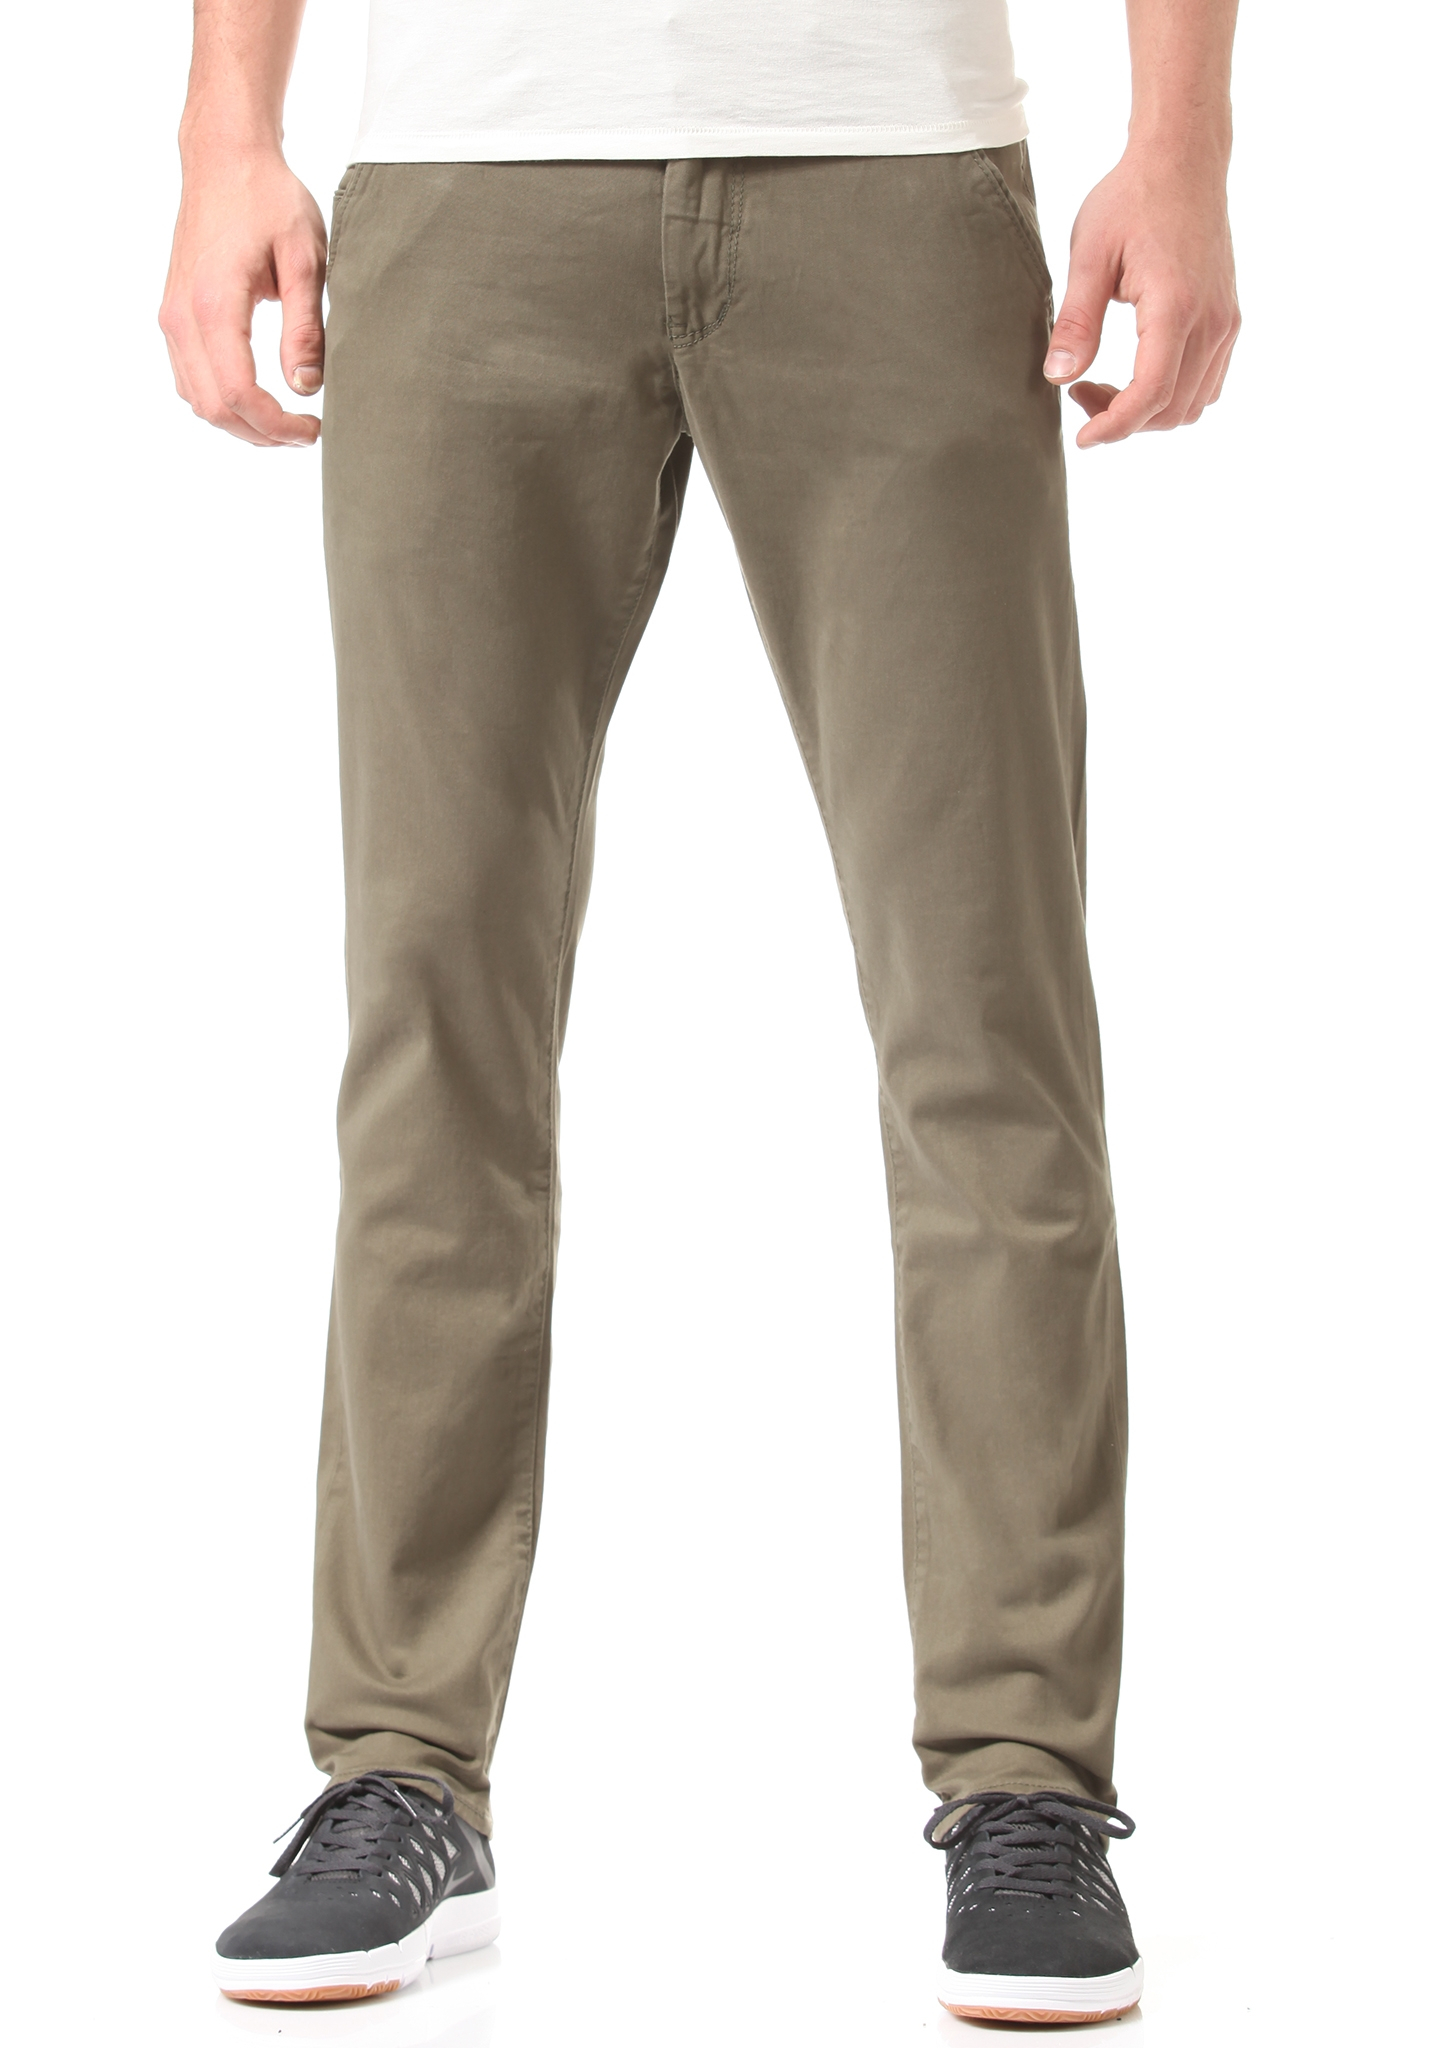 Reell Flex Tapered Chinos olive 38/34